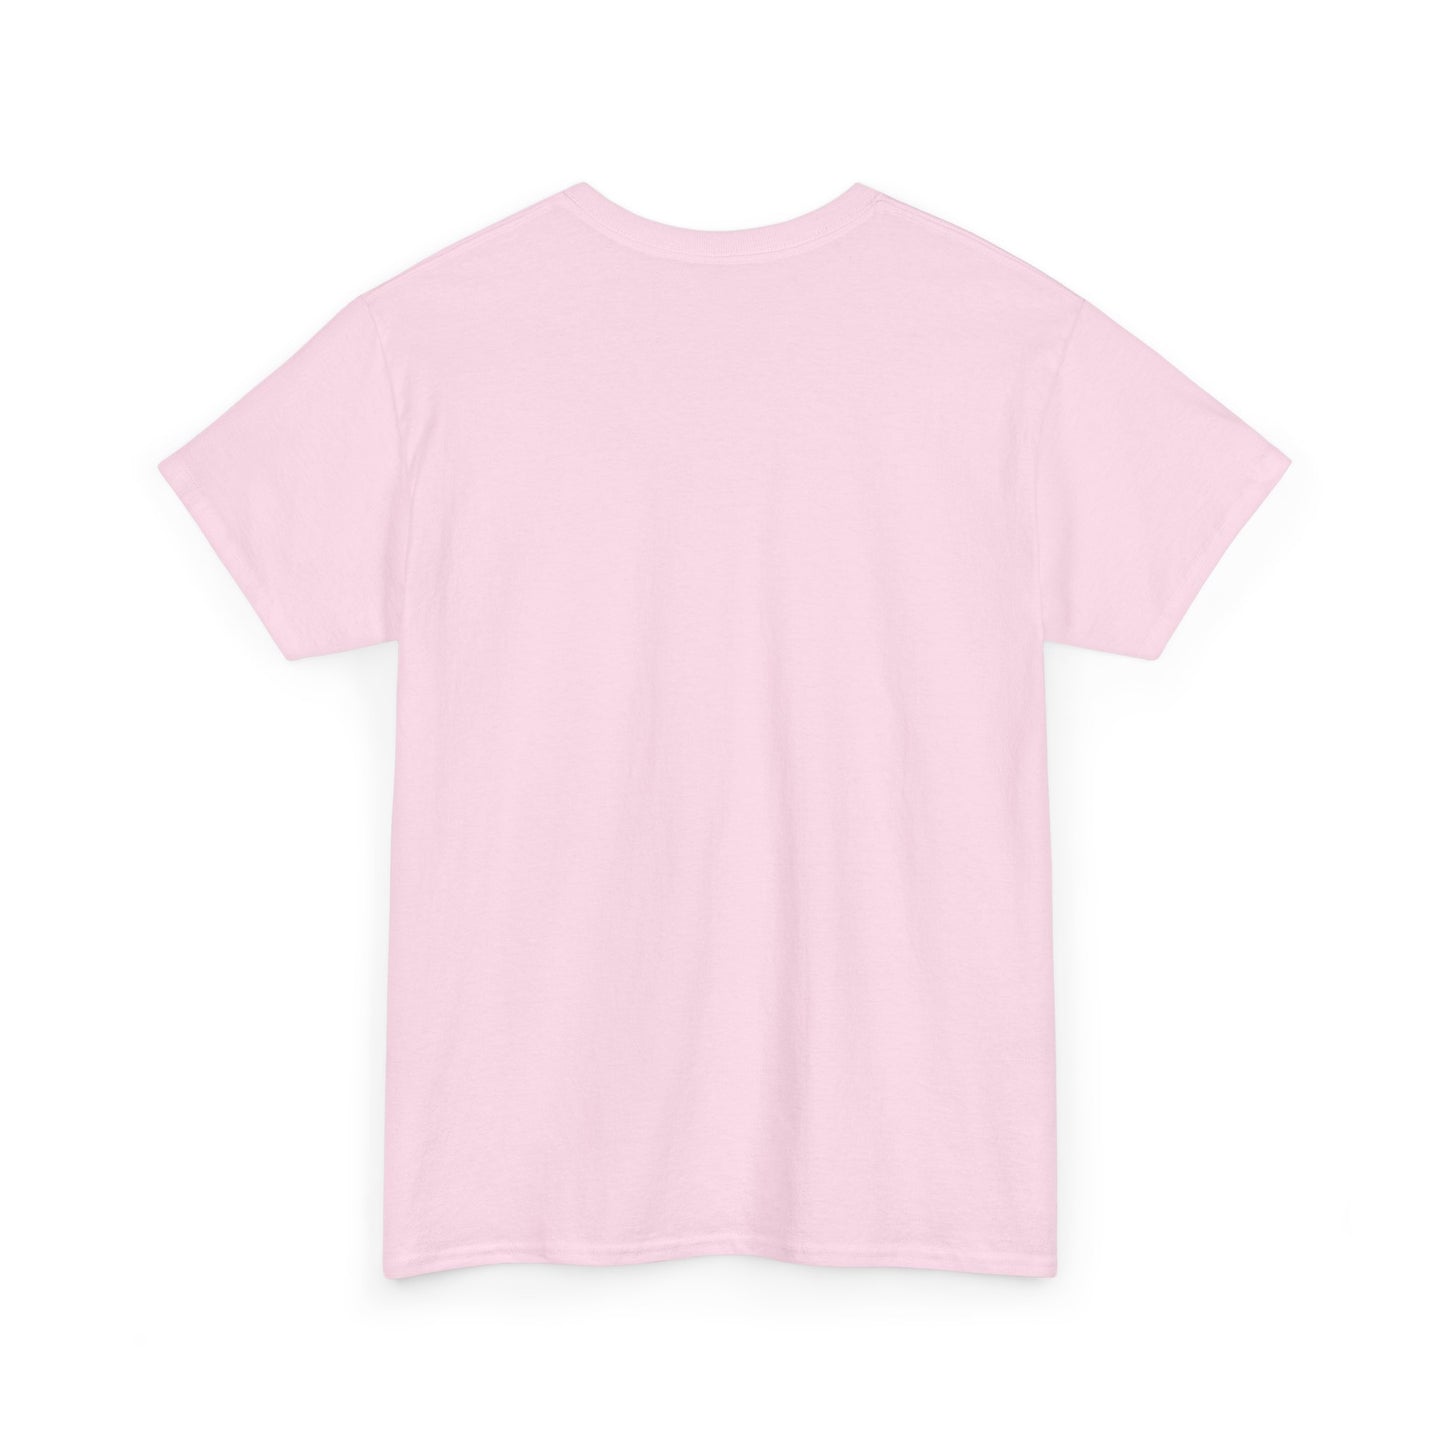 Unisex Heavy Cotton (Support Breast Cancer) T-shirt